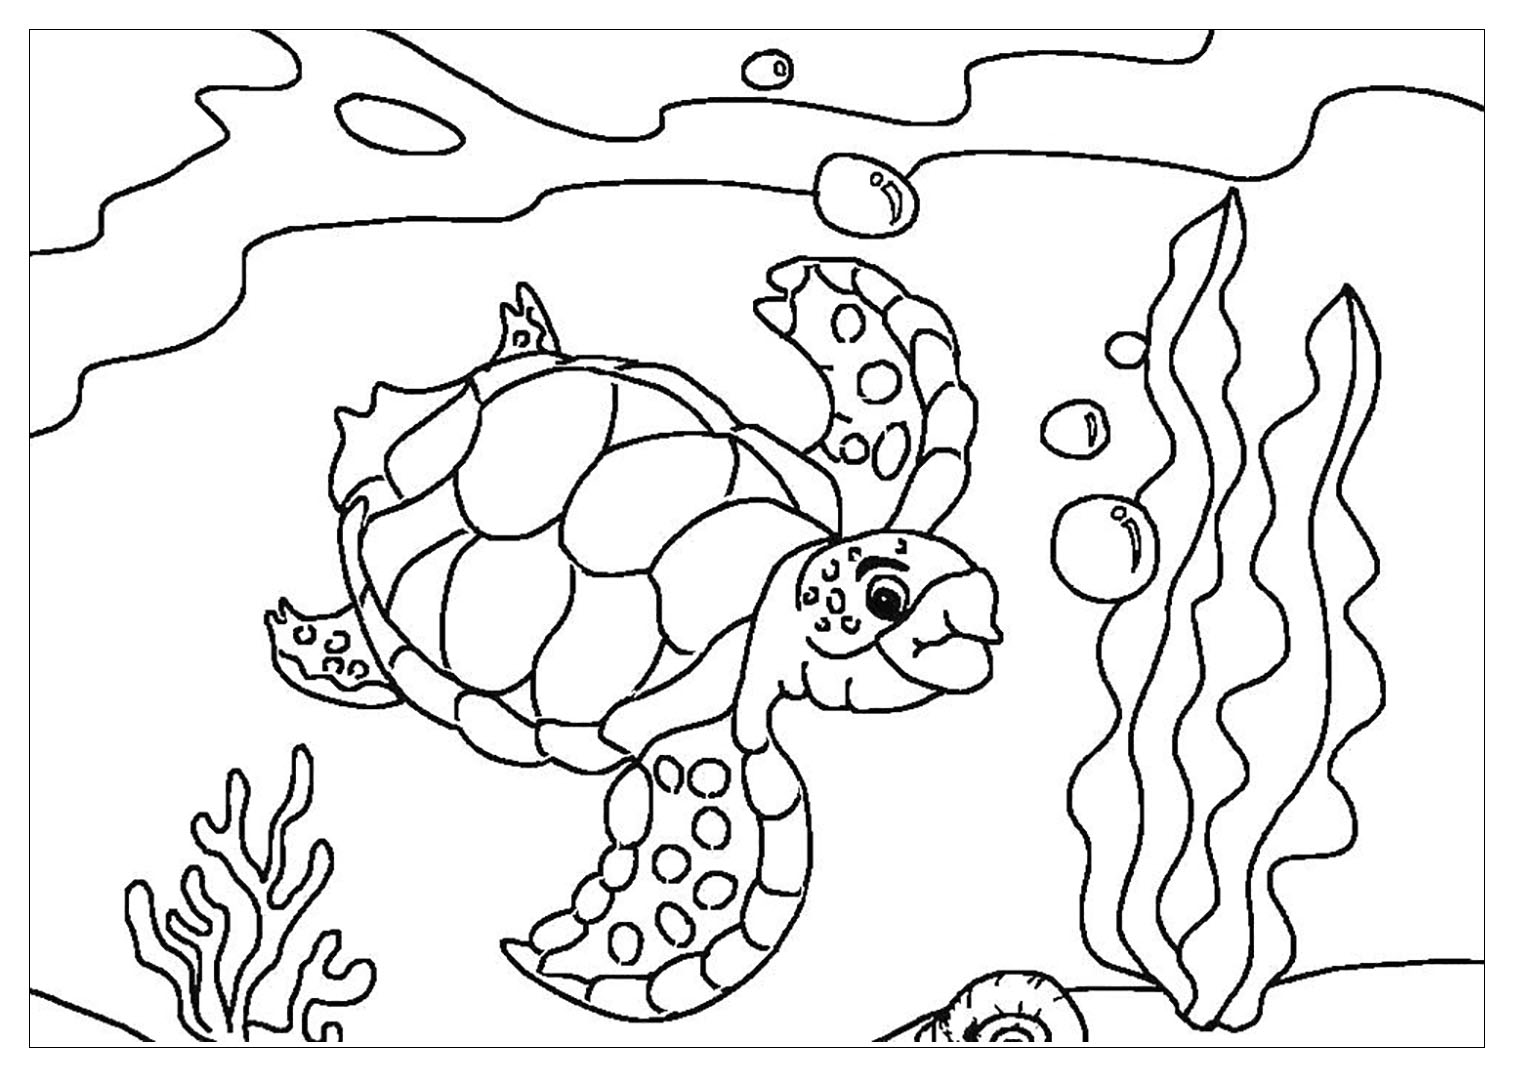 Incredible turtle coloring for kids